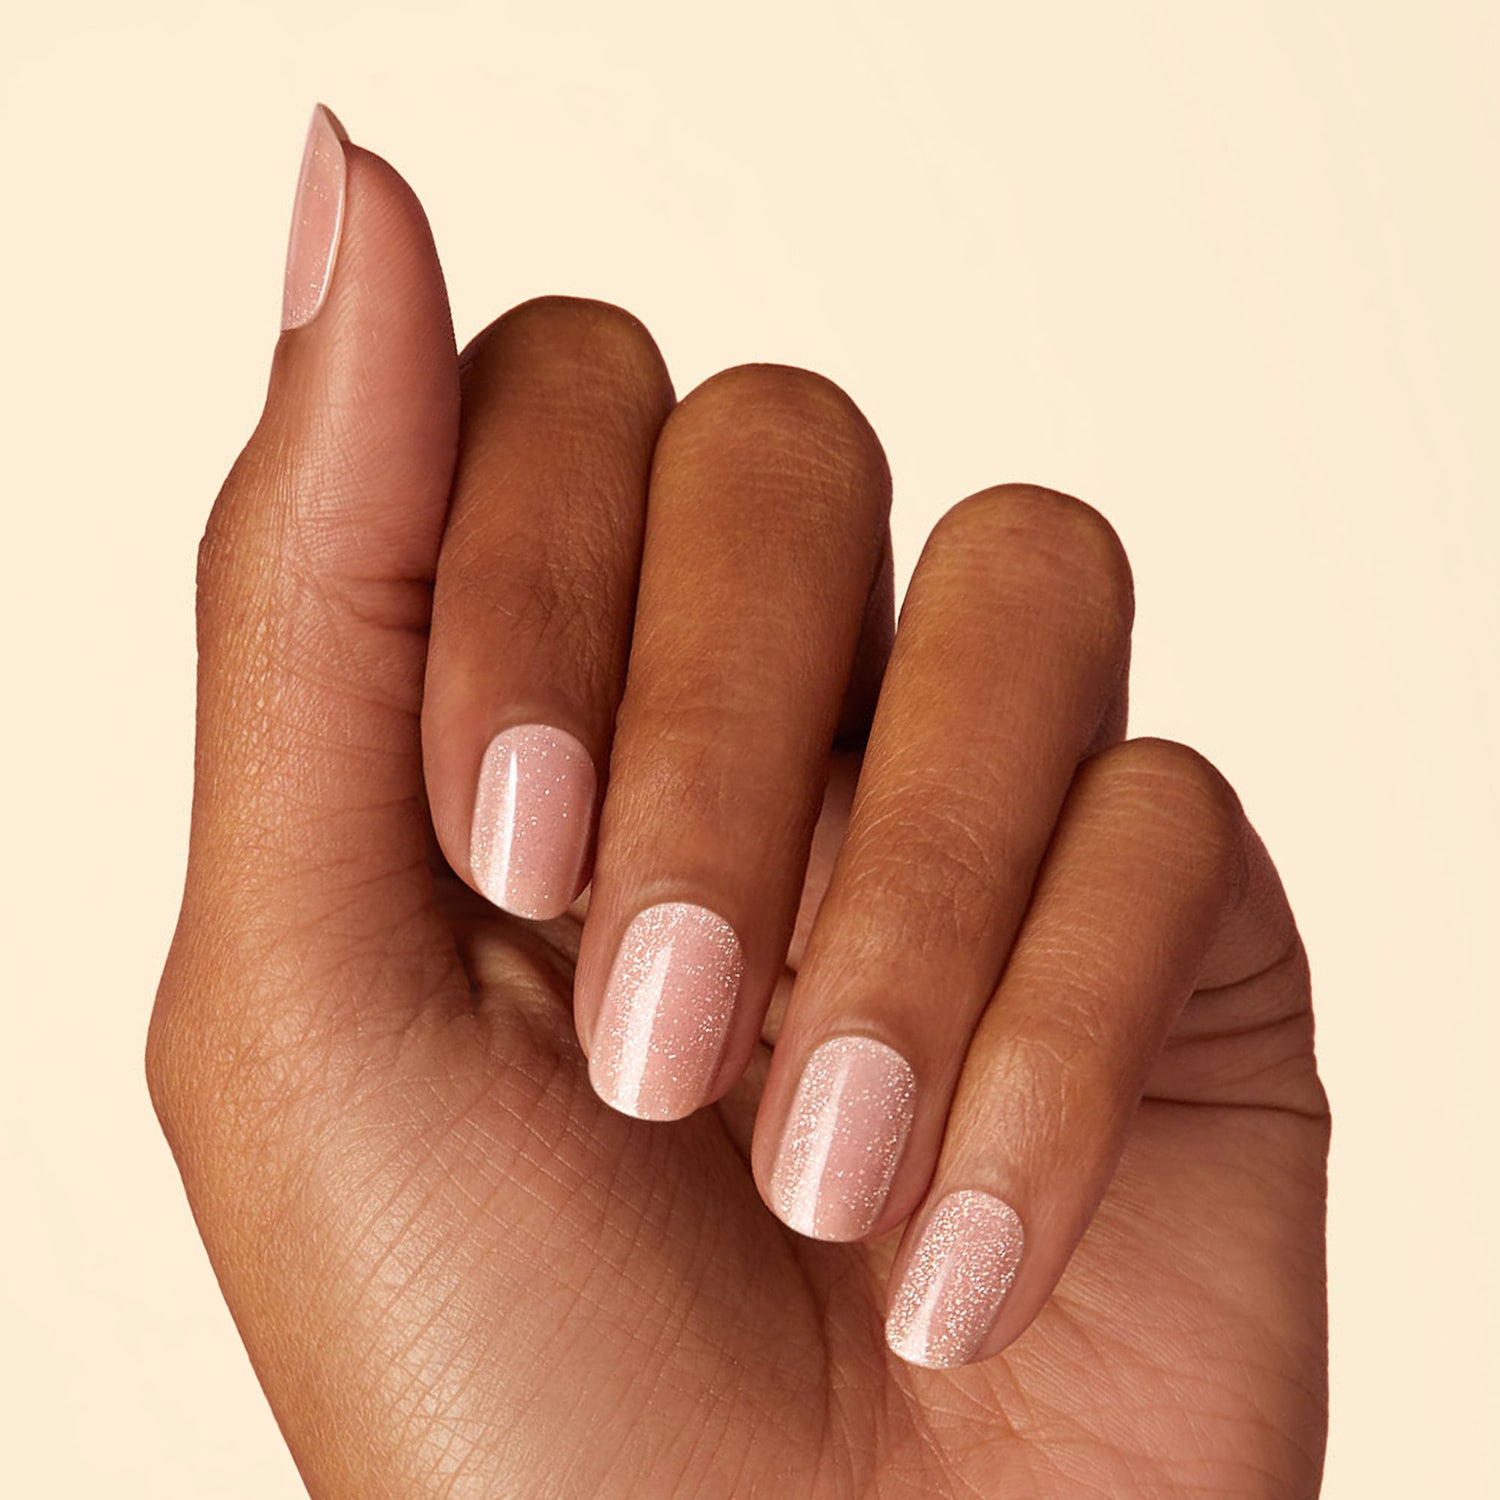 Nude pink gel nail strips featuring velvet shimmer with a double gel formula for an ultra-smooth finish.